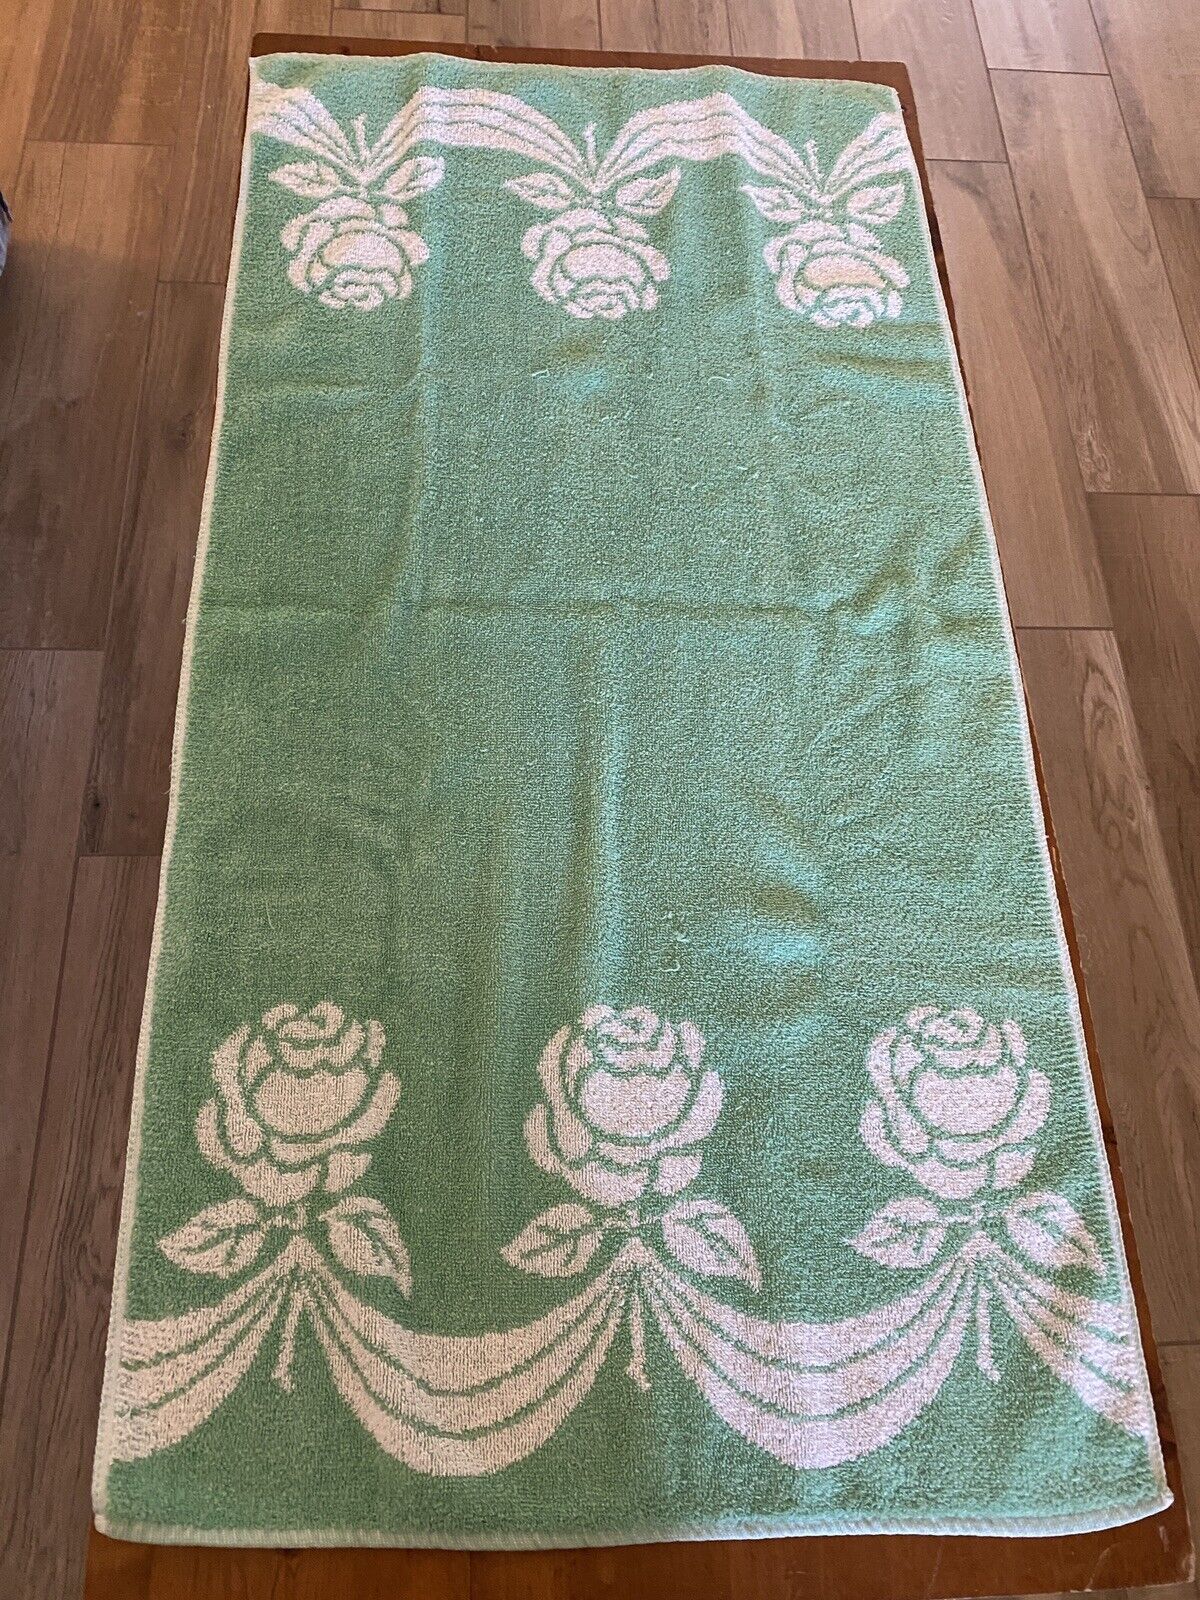 Vintage 1950s One Dundee Bath Towel White Roses on Green and Reverse, Colorful